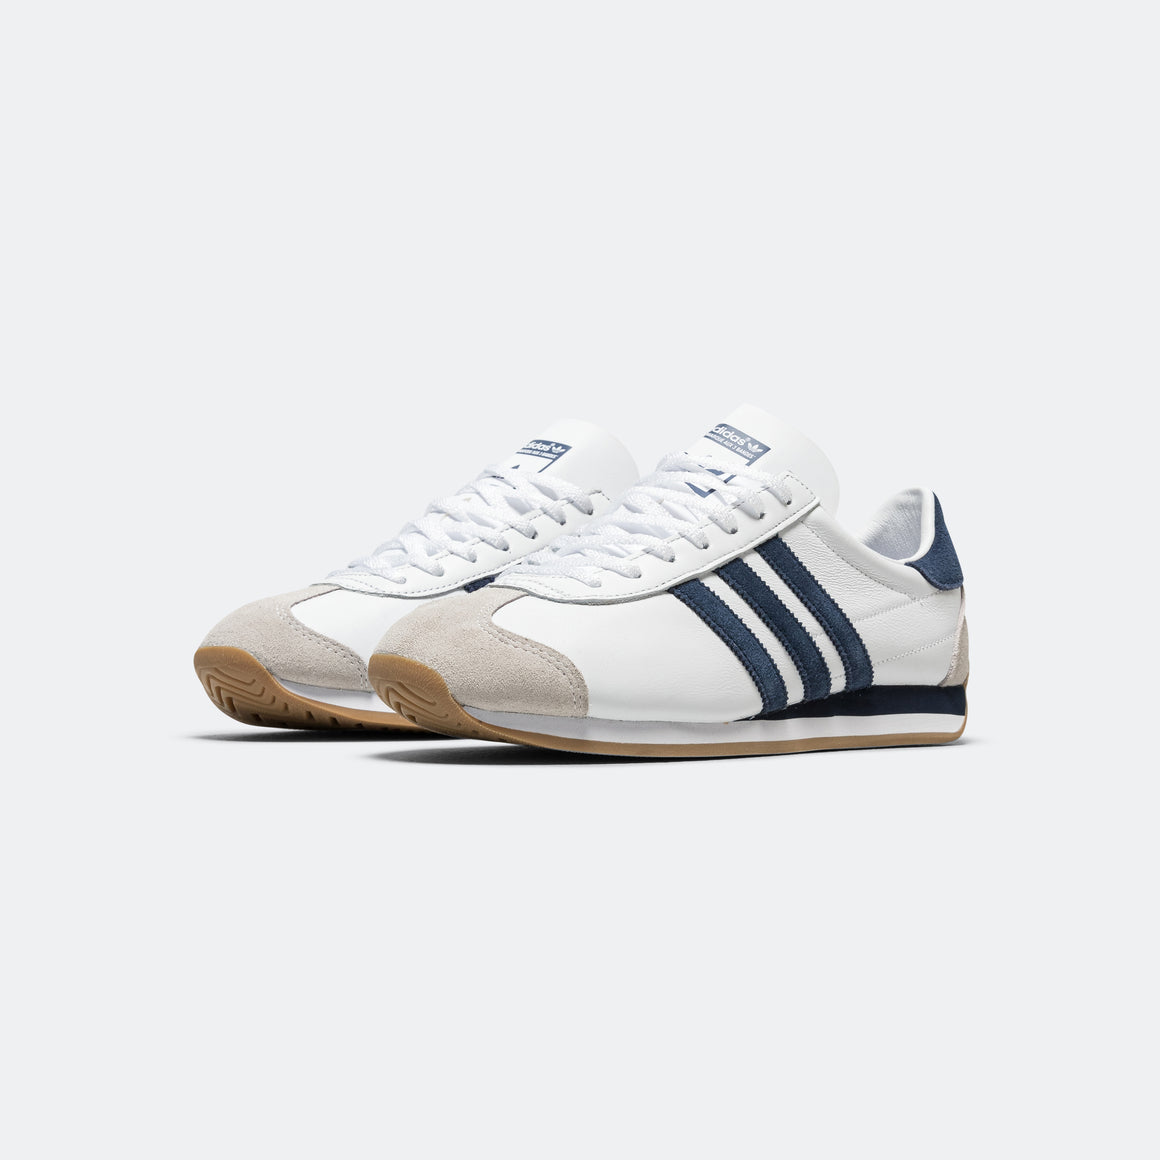 adidas - Country OG - Footwear White/Night Indigo-Gum - UP THERE